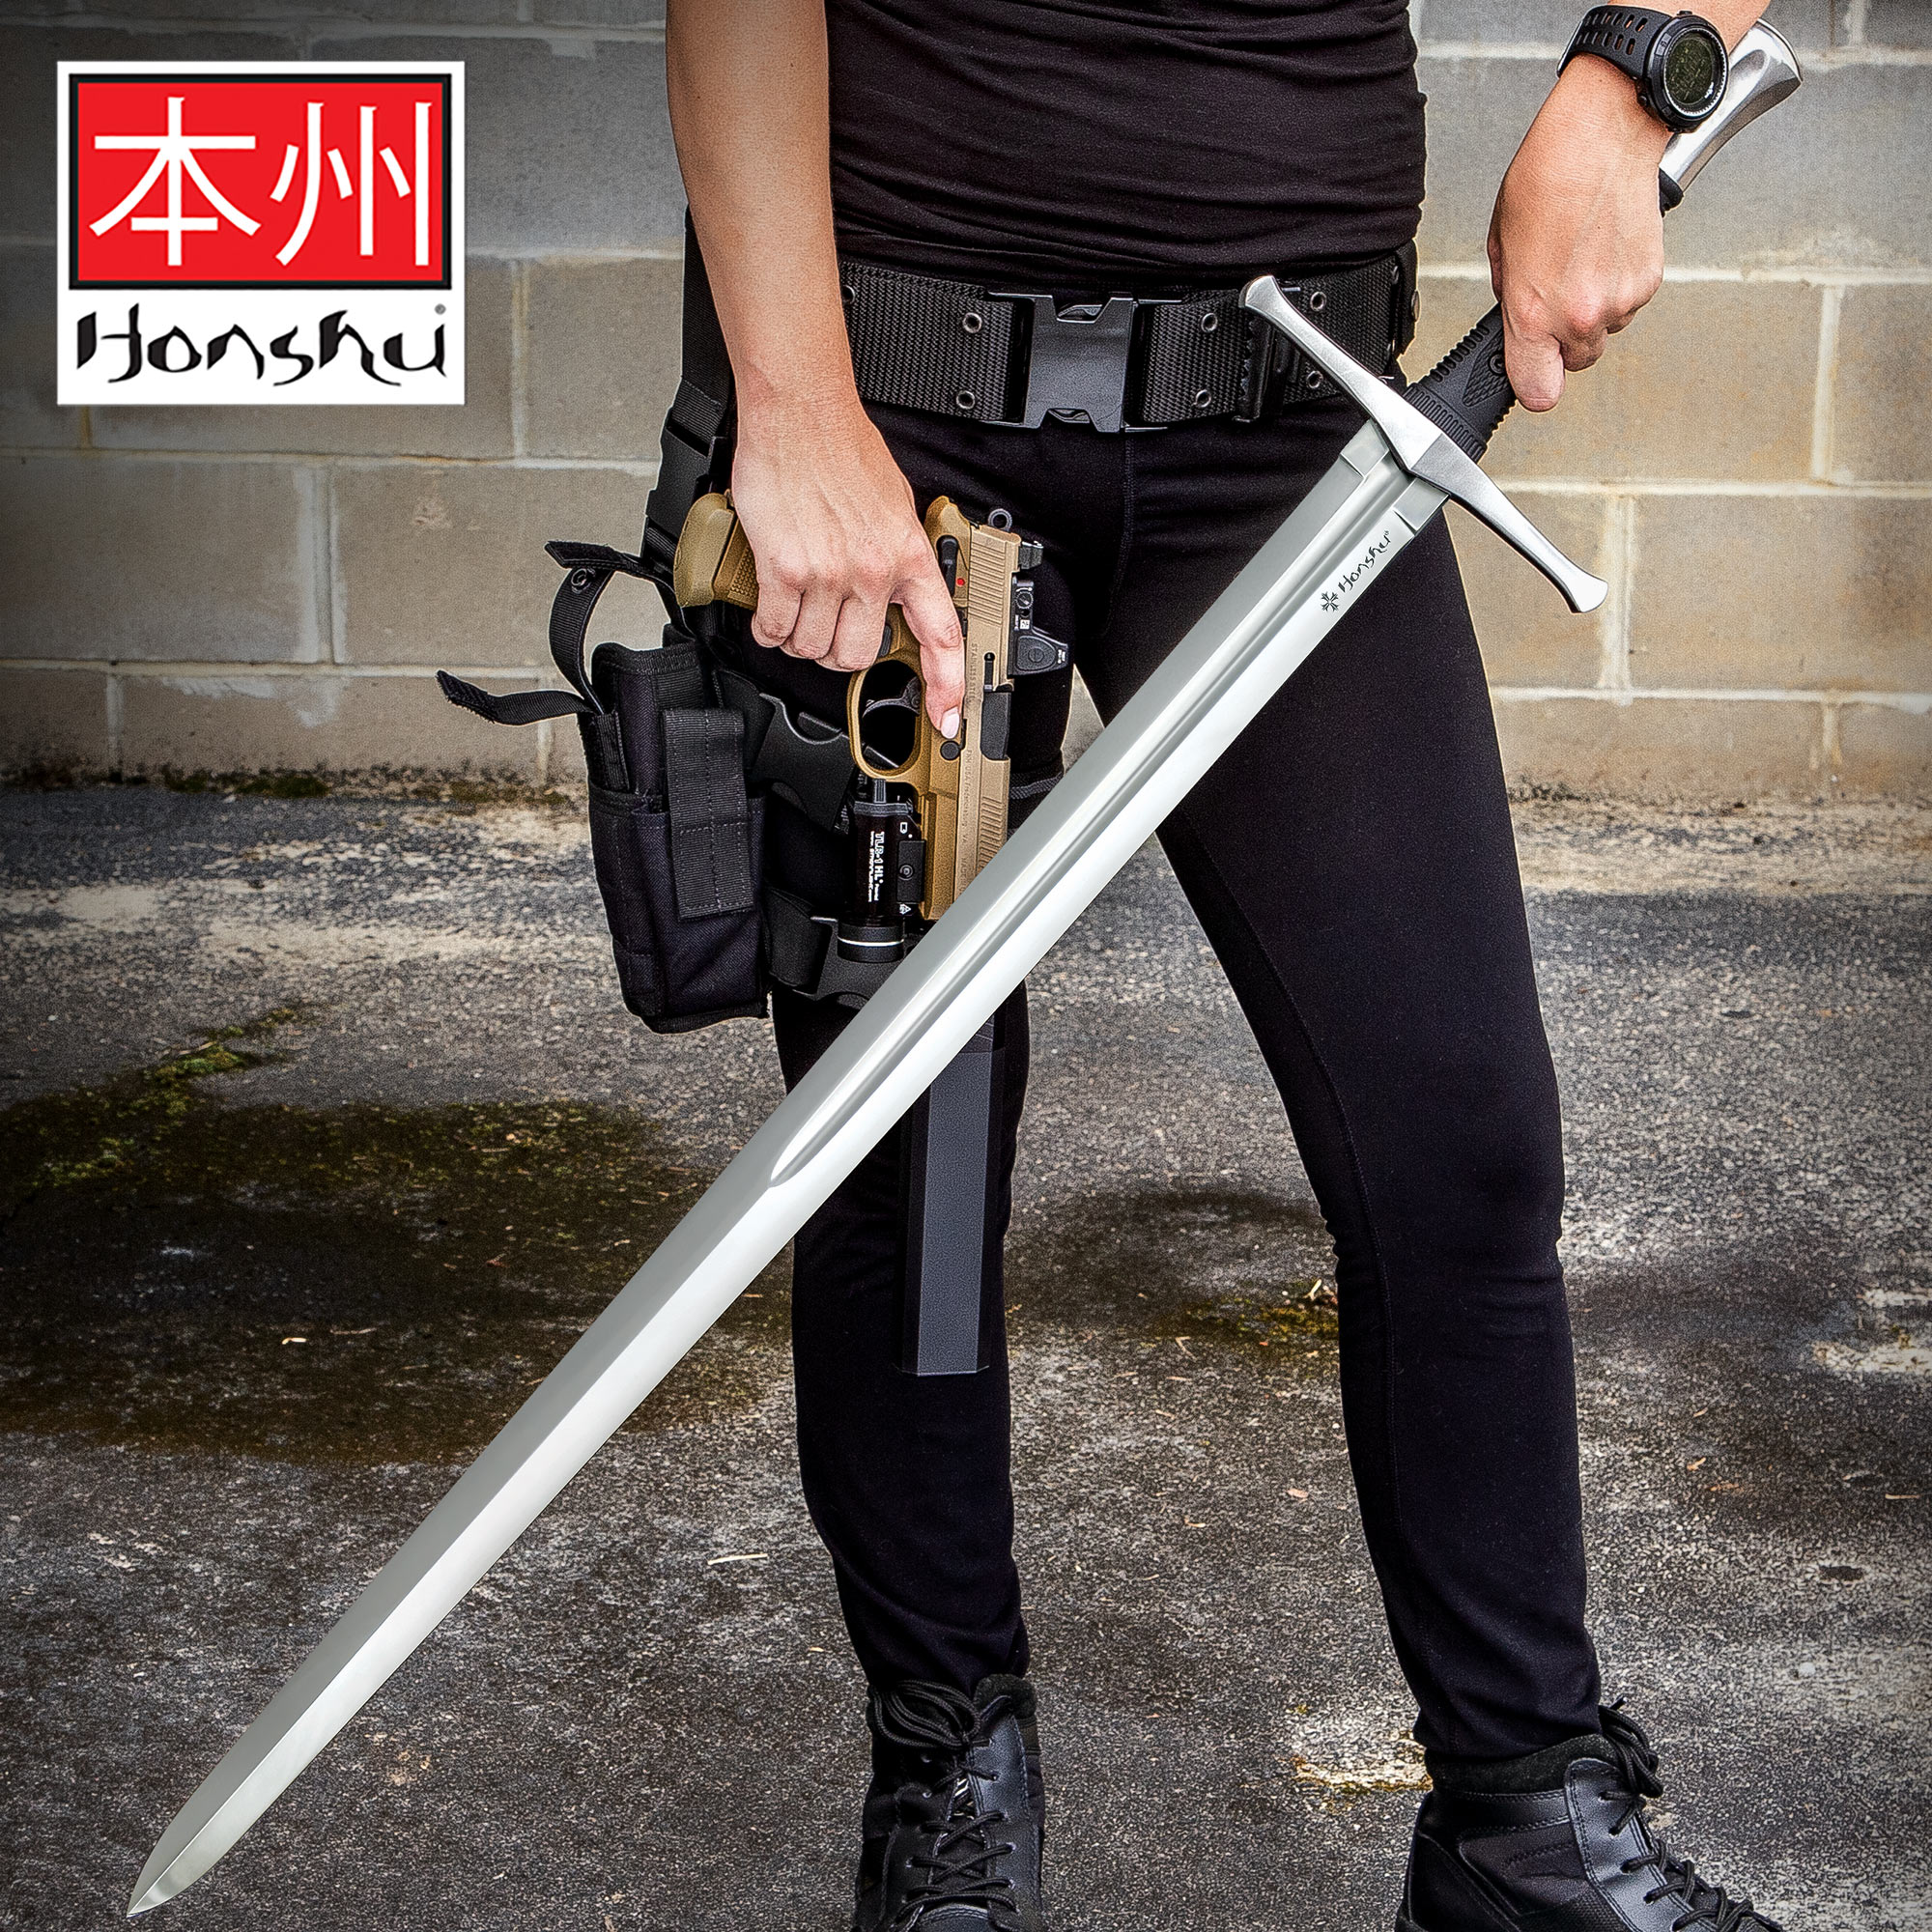 Honshu Broadsword With Scabbard 1060 High Carbon Steel Blade Tpr